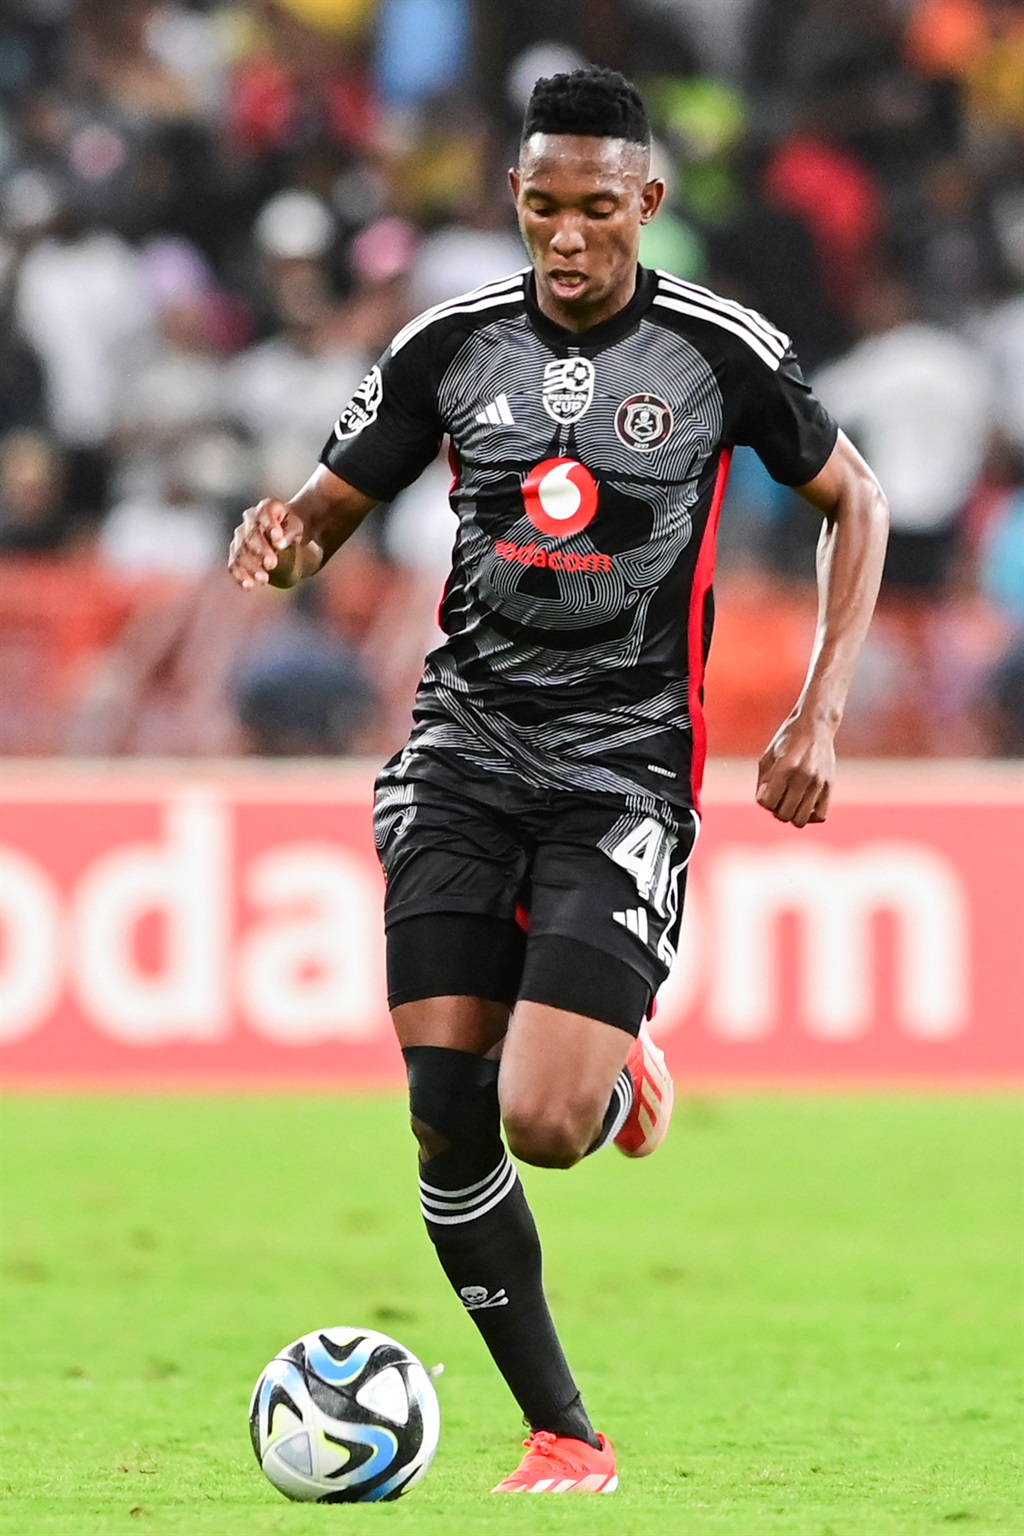 DURBAN, SOUTH AFRICA - APRIL 13: Mbatha Thalente of Orlando Pirate during the Nedbank Cup, Quarter Final match between AmaZulu FC and Orlando Pirates at Moses Mabhida Stadium on April 13, 2024 in Durban, South Africa. (Photo by Darren Stewart/Gallo Images)